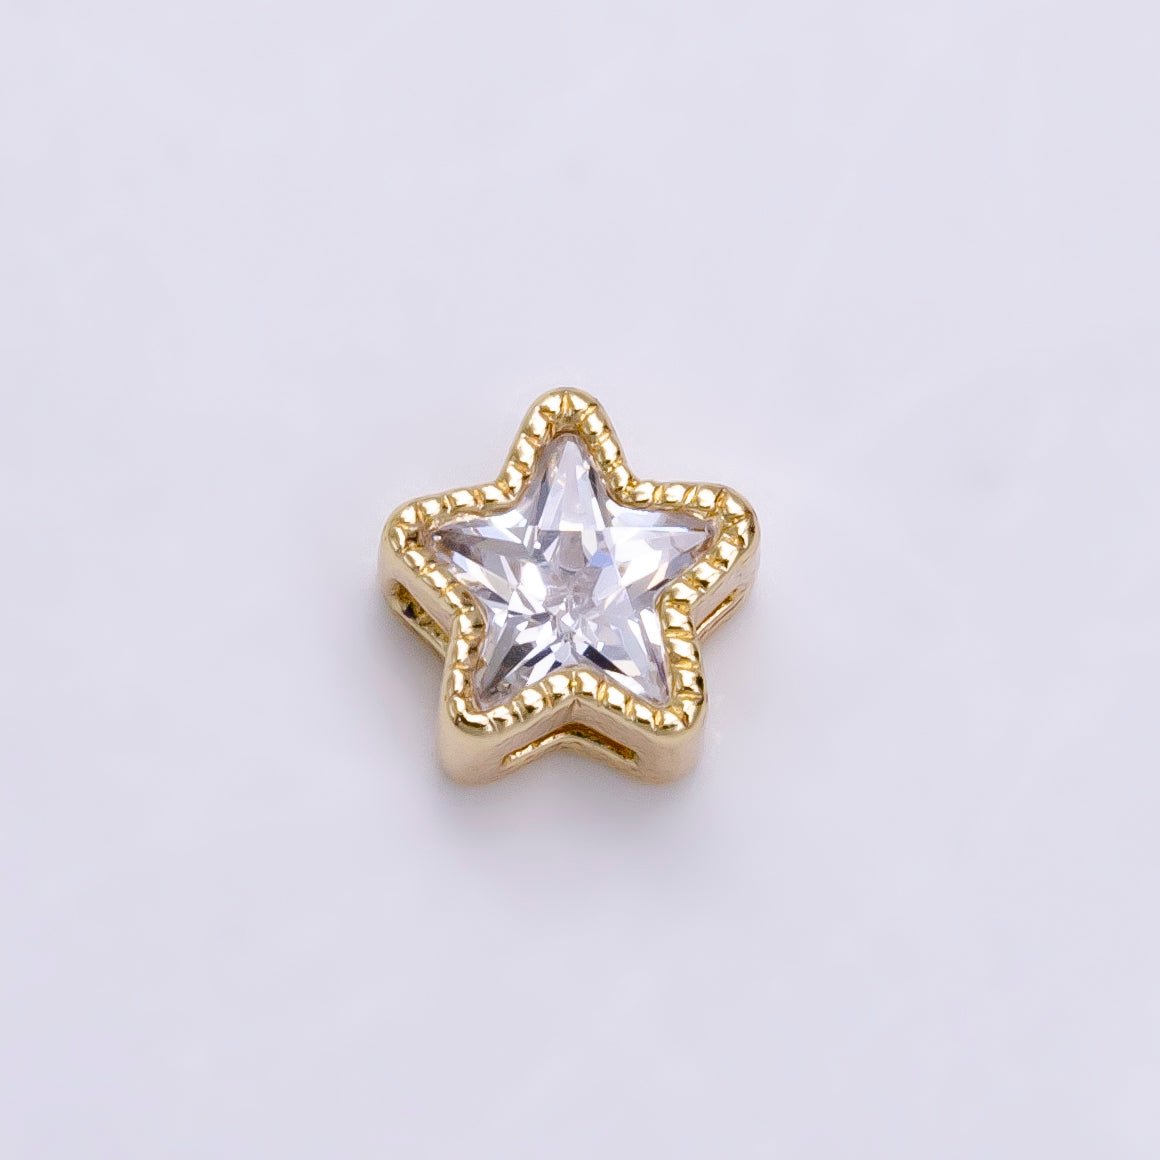 10x 7mm Star Beads for Necklace Bracelet Component in Real Gold Plated B-162 - DLUXCA